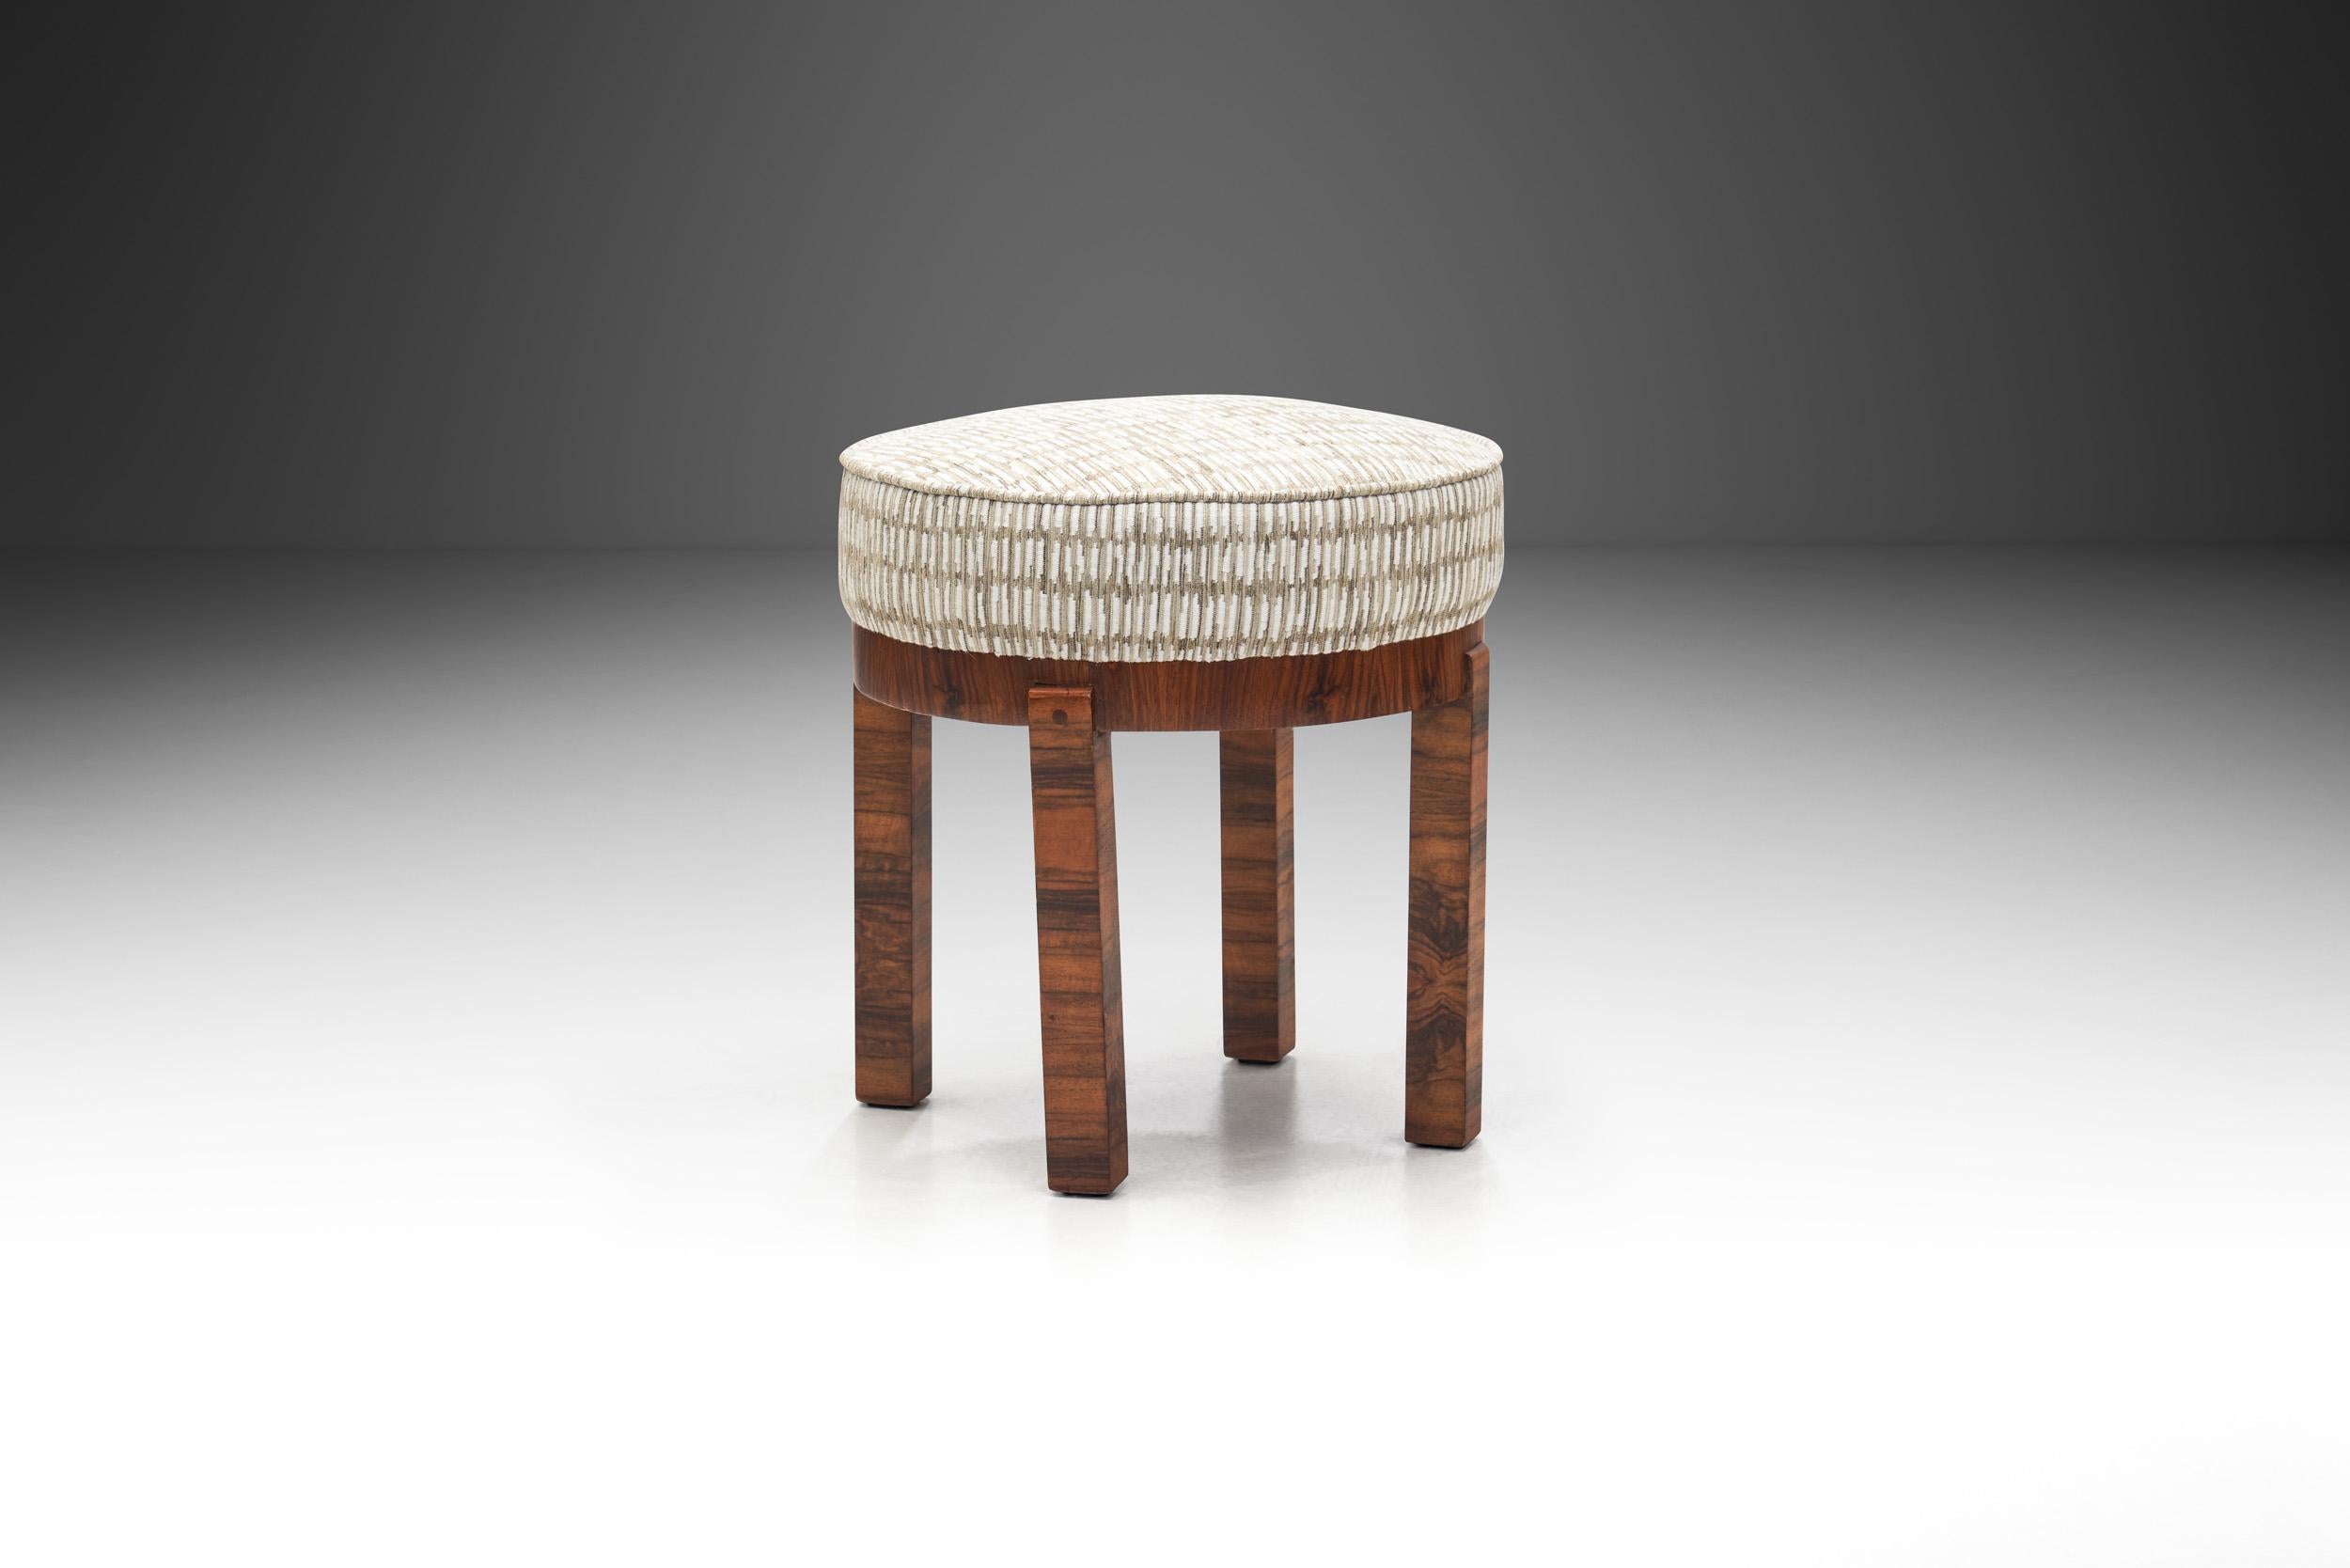 European Art Deco Stool in Bookmatched Zebrawood , Europe 1930s For Sale